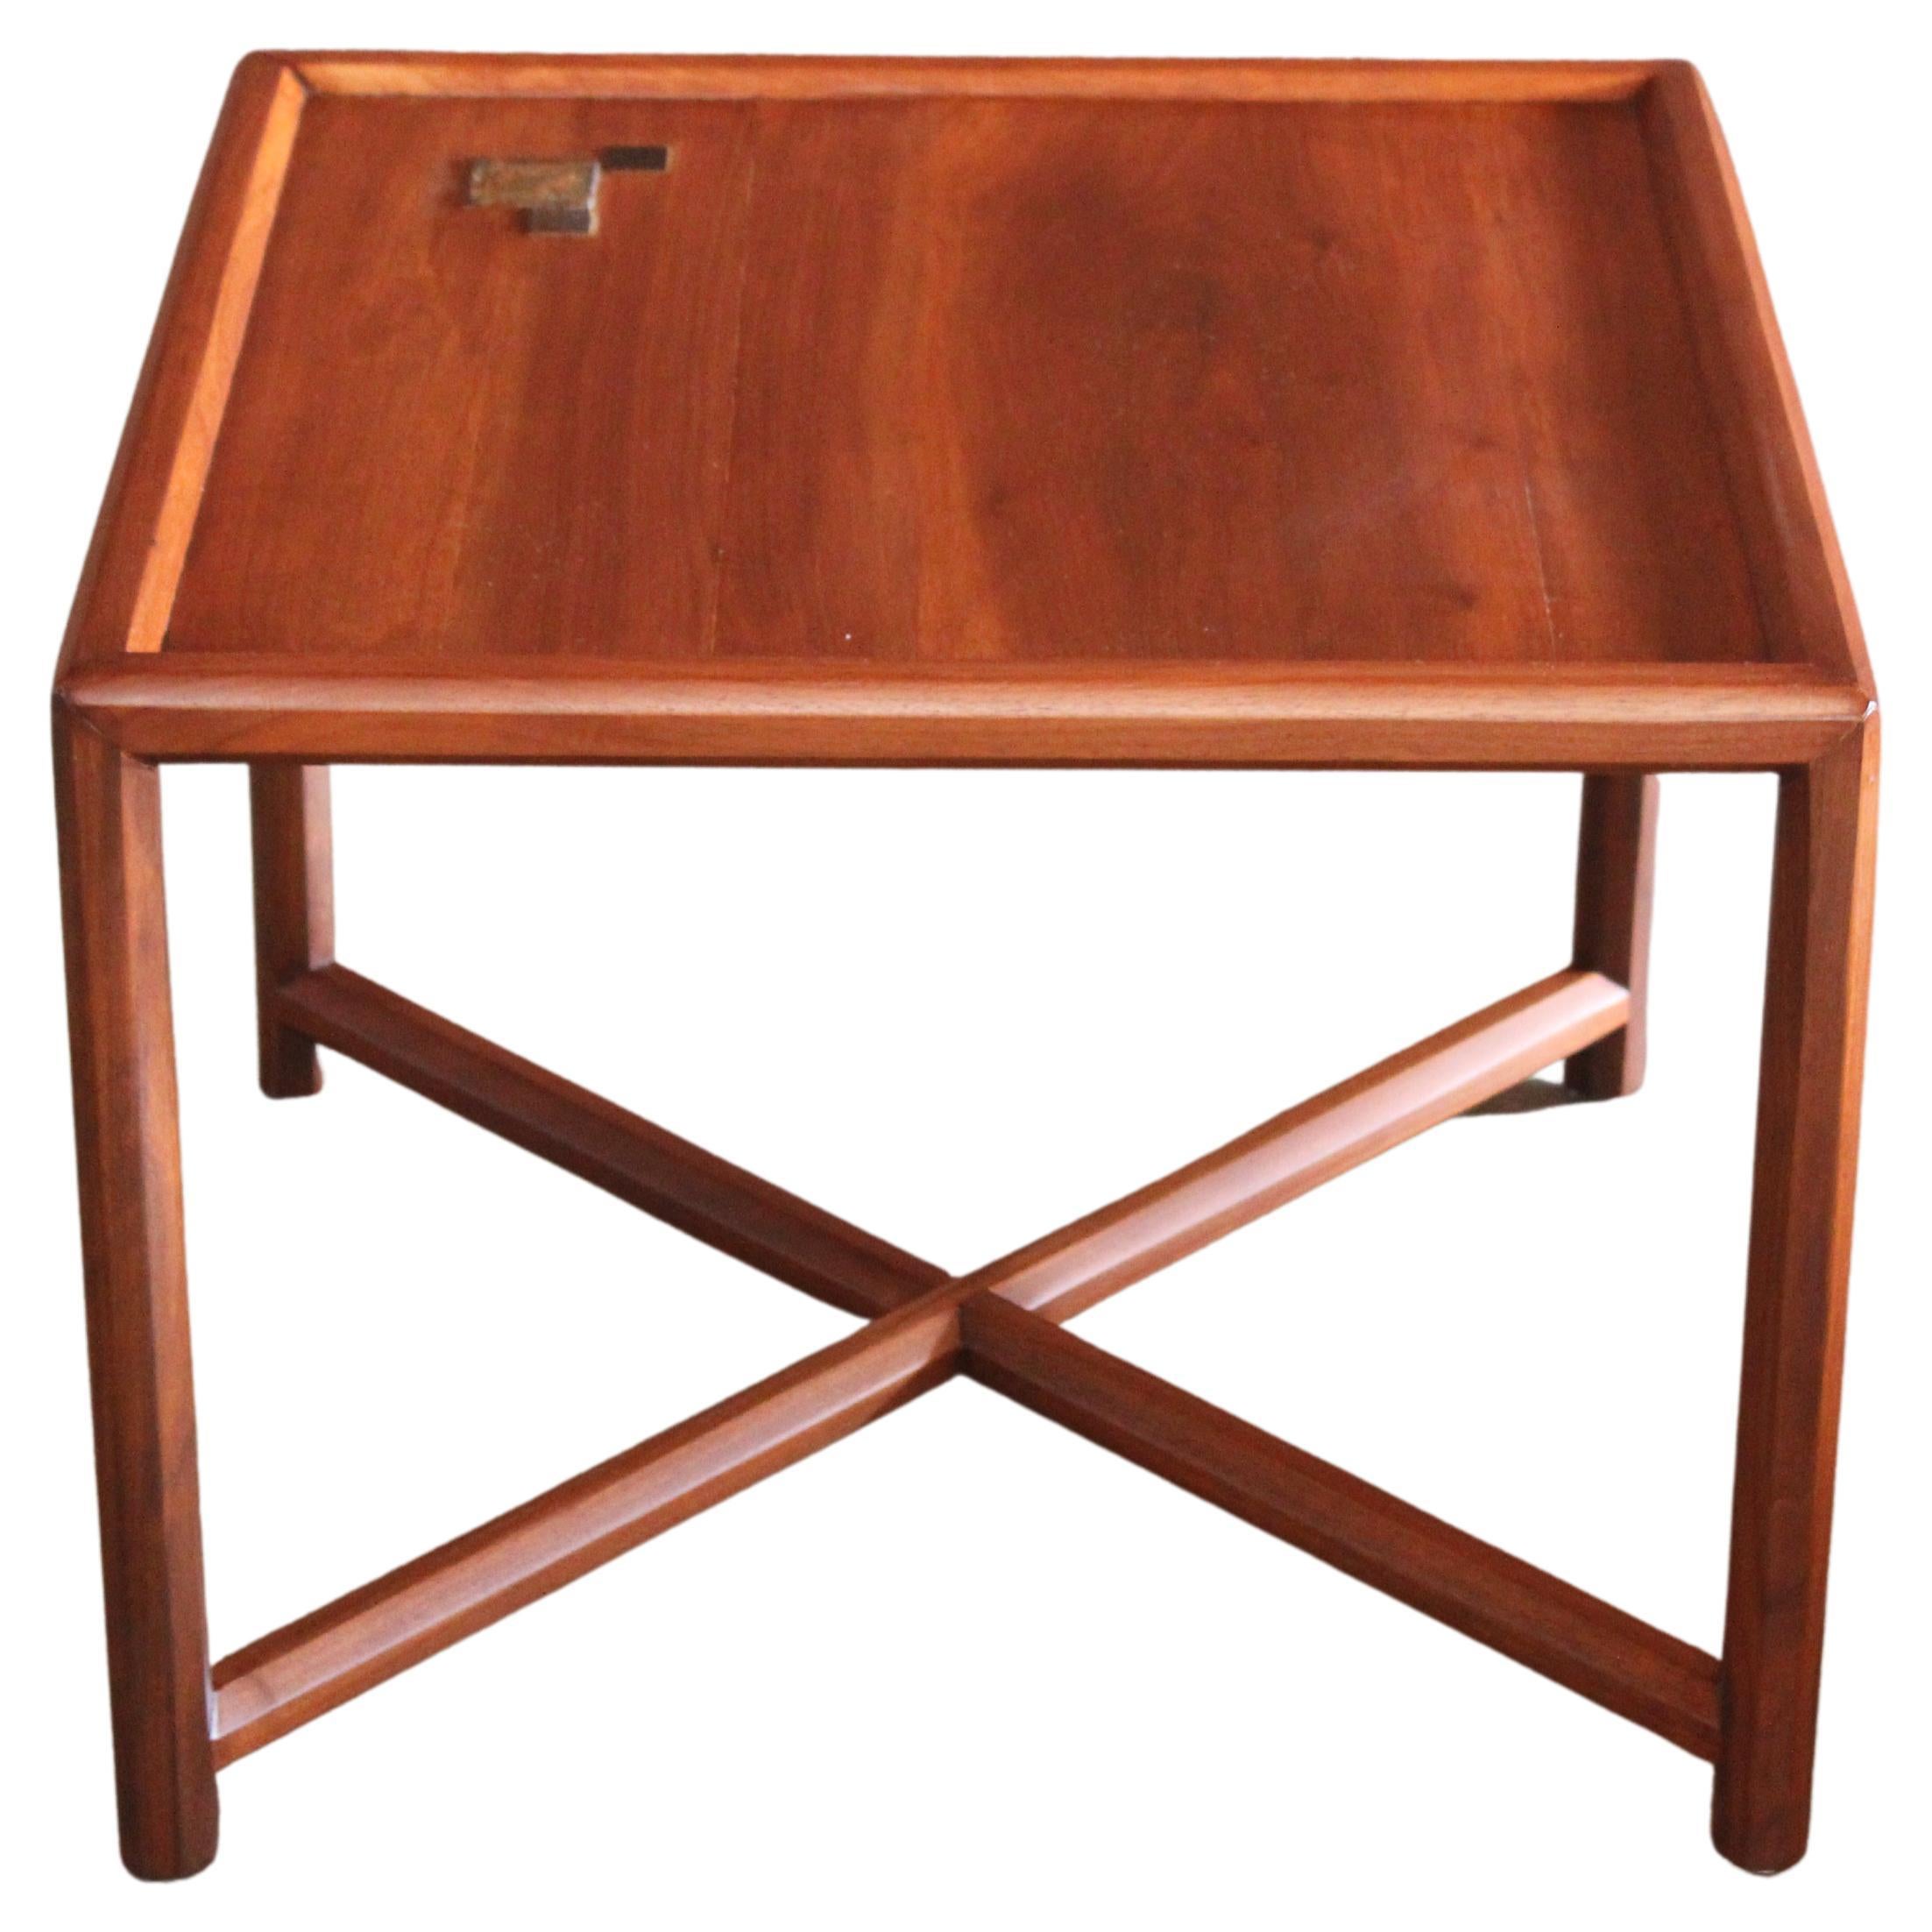 Walnut End Table with Tiffany Tiles by Edward Wormley for Dunbar, 1950s For Sale